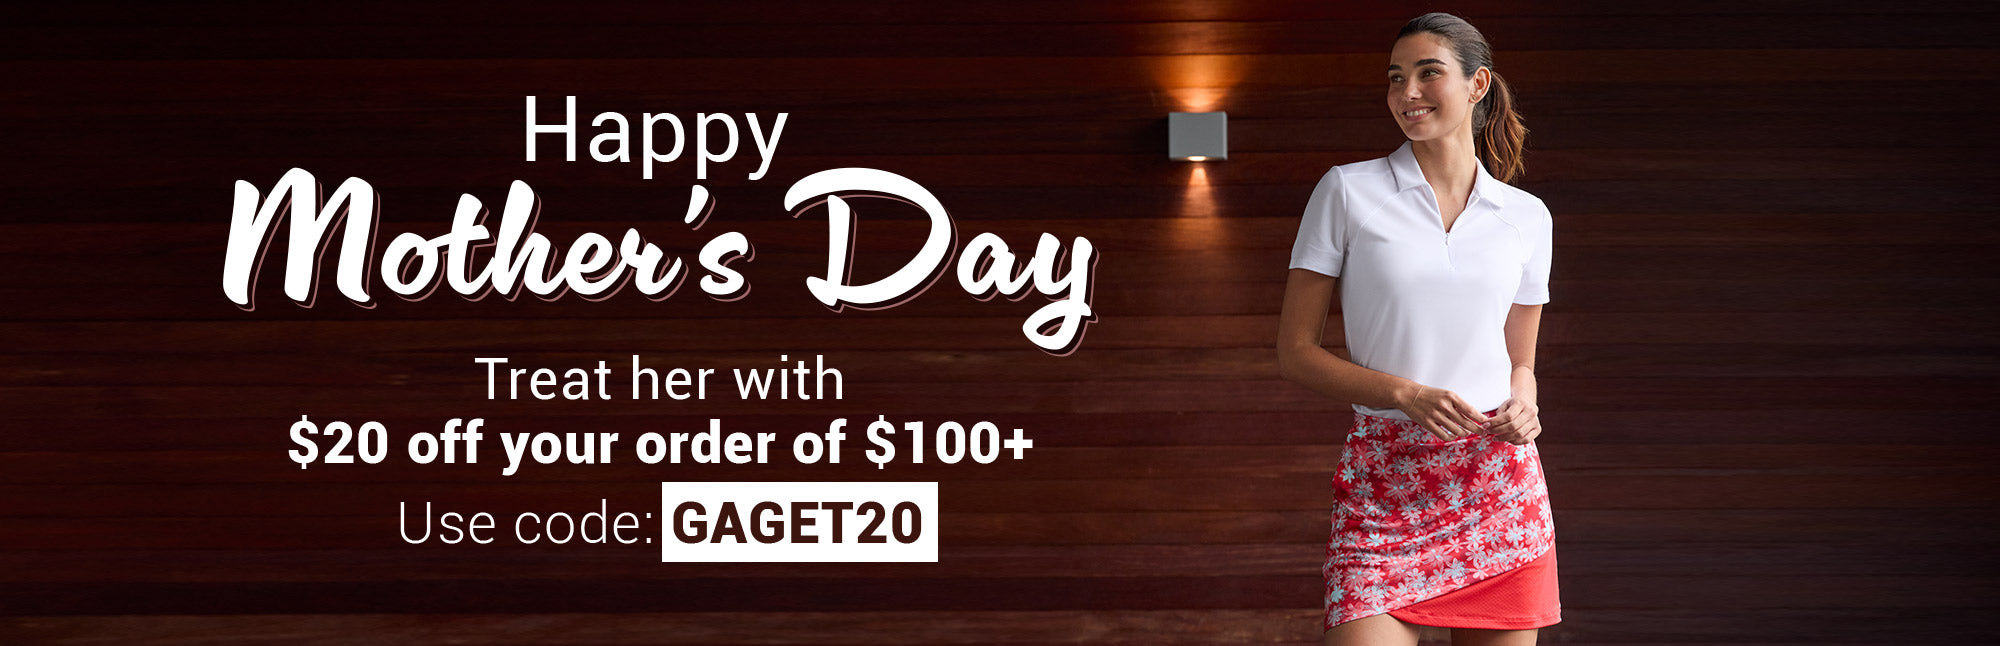 Happy Mother's Day | Treat her with $20 off your order of $100+ Use code: GAGET20 | Shop Now